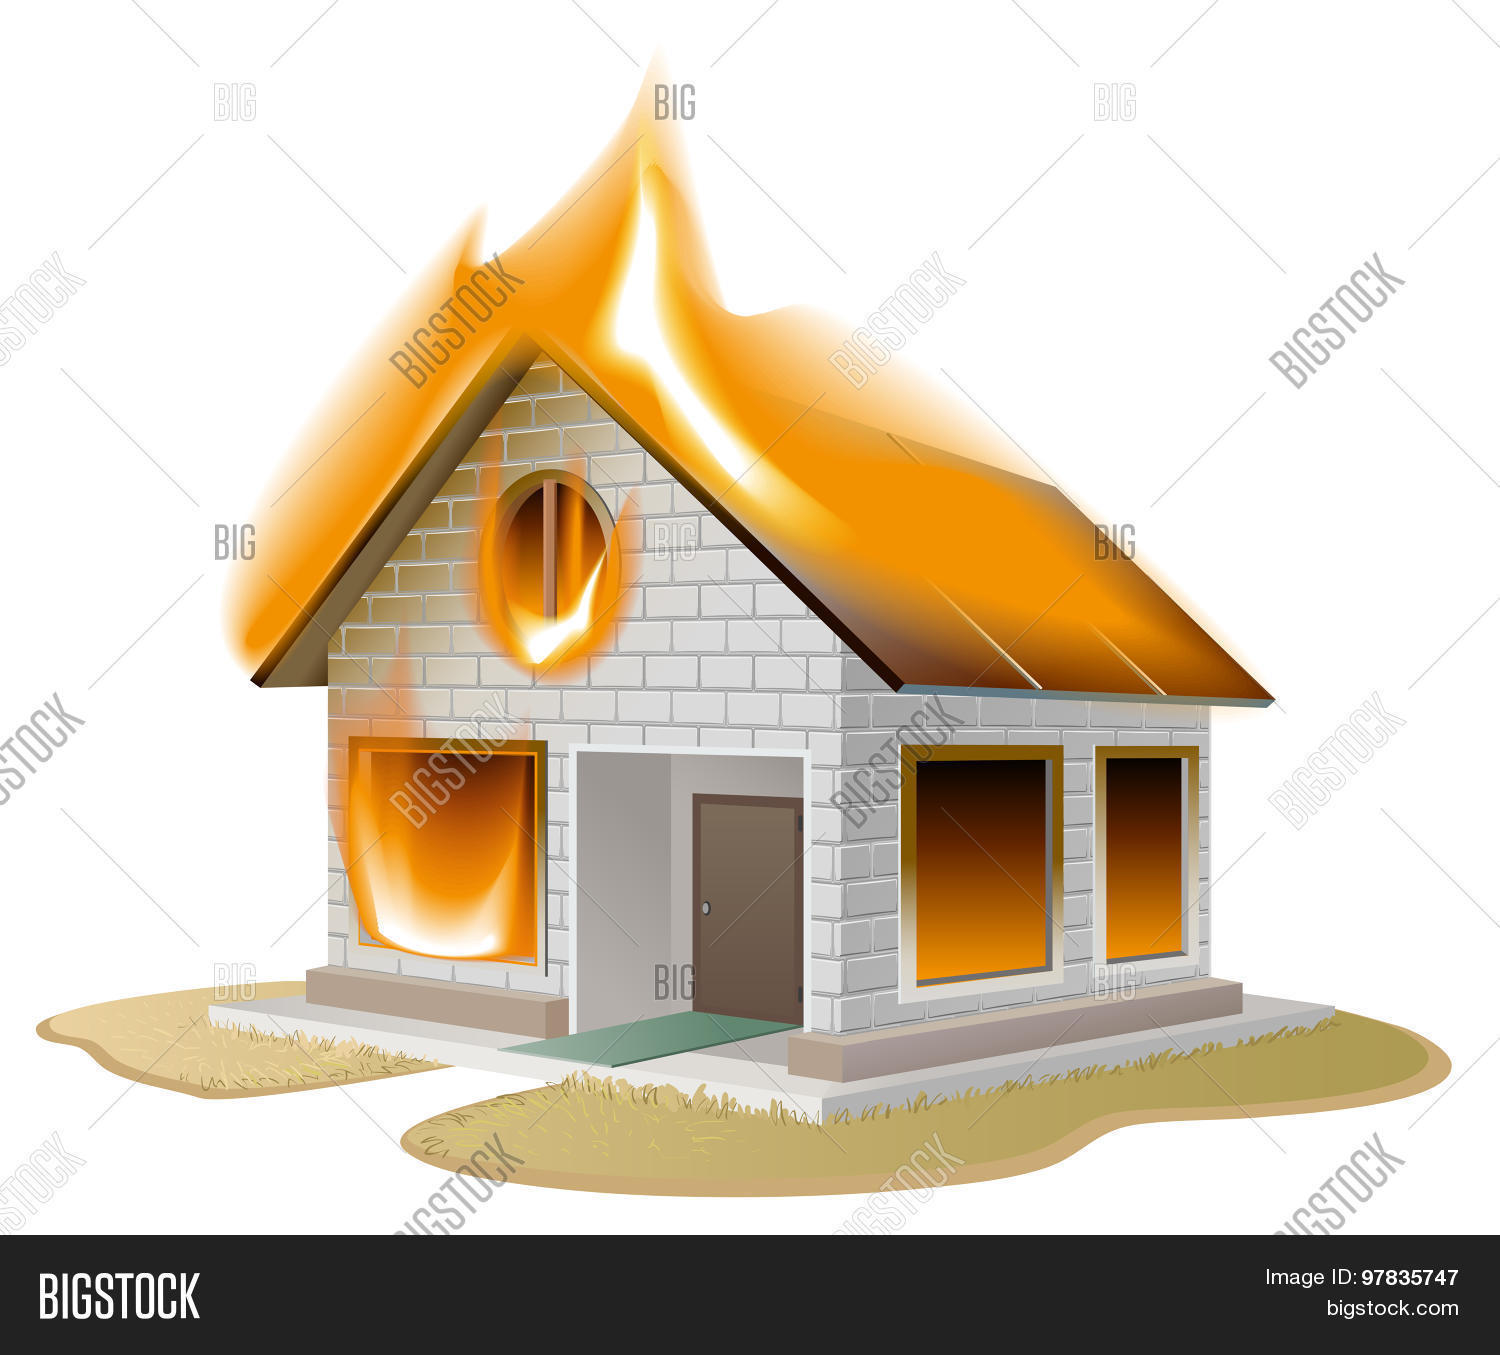 White Brick House On Fire. Country Vector & Photo | Bigstock